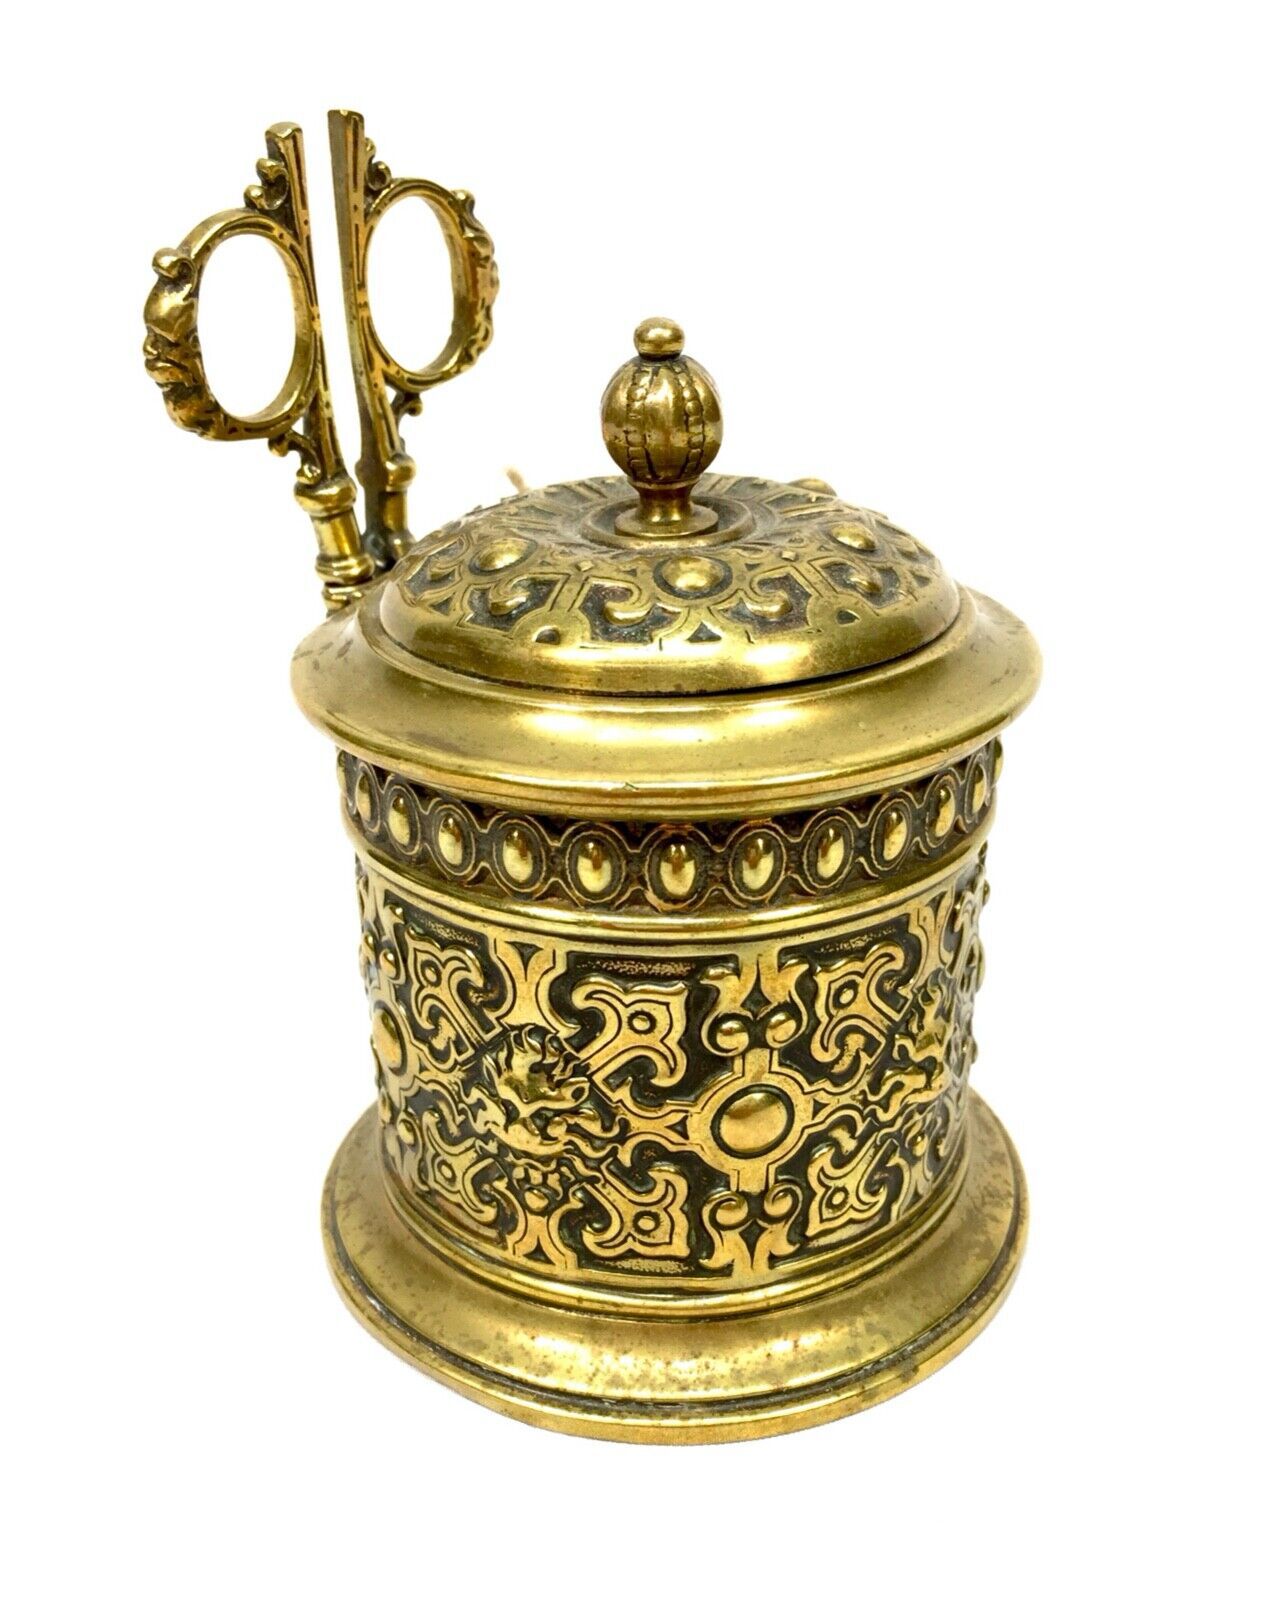 Antique Brass String Box / Dispenser With Scissors by Adolph Frankau & Co c.1870